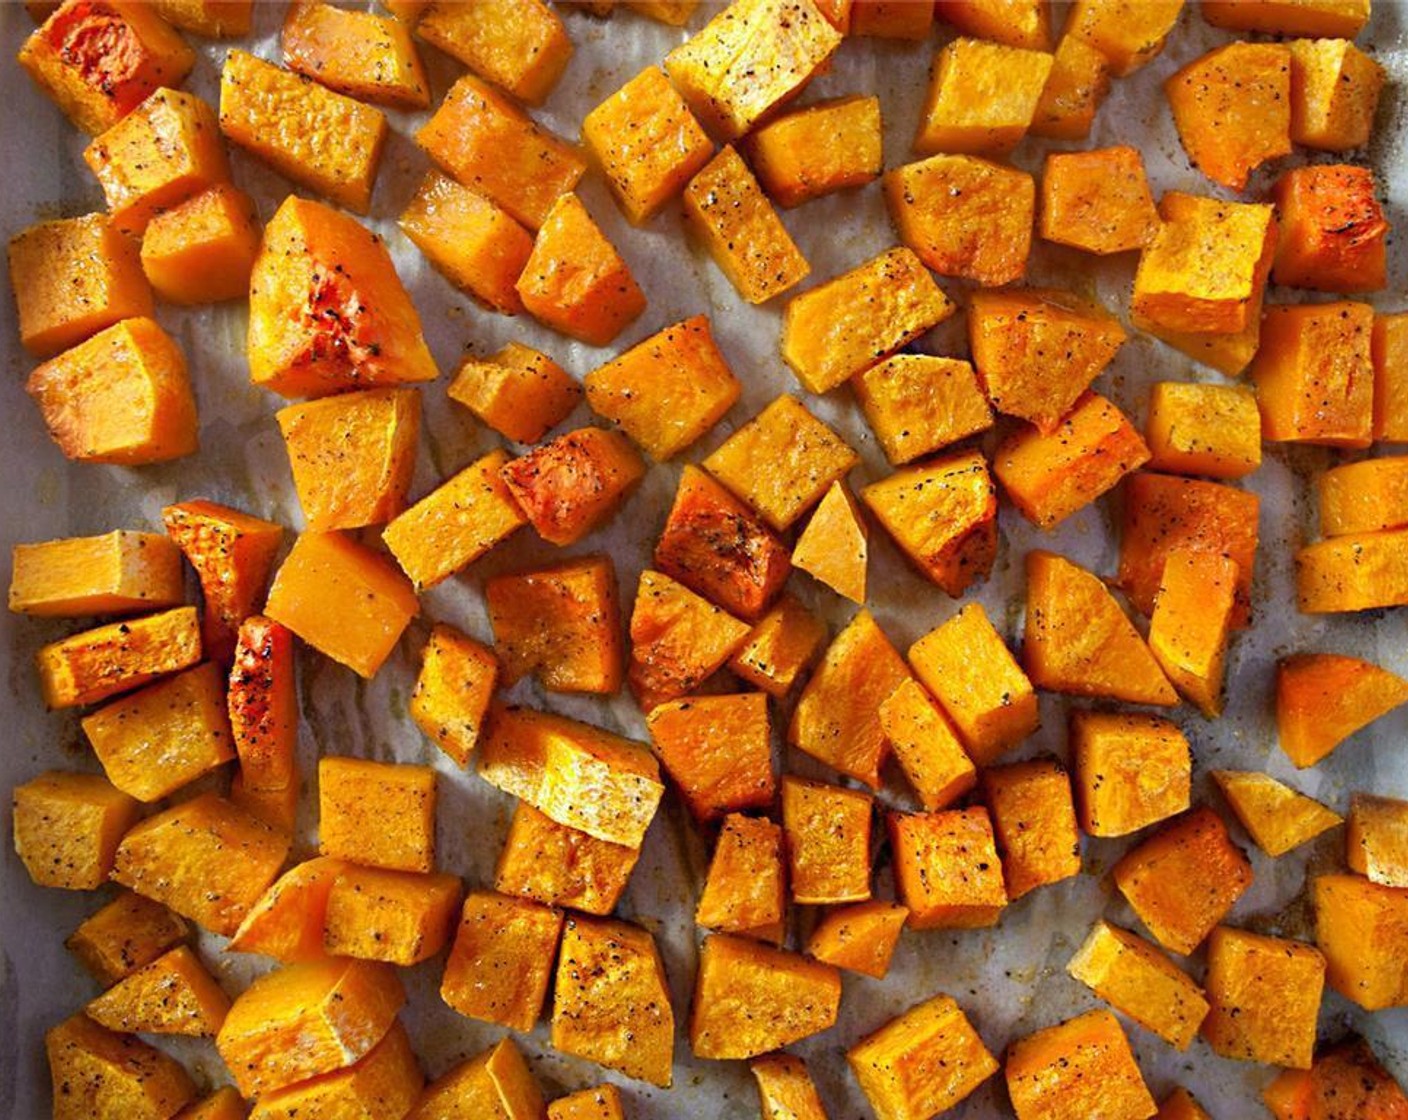 step 2 On a parchment lined baking sheet, scatter the small Butternut Squash (1) and drizzle with Olive Oil (1 Tbsp). Sprinkle with Kosher Salt (1/4 tsp) and Ground Black Pepper (1/4 tsp) and toss to coat.